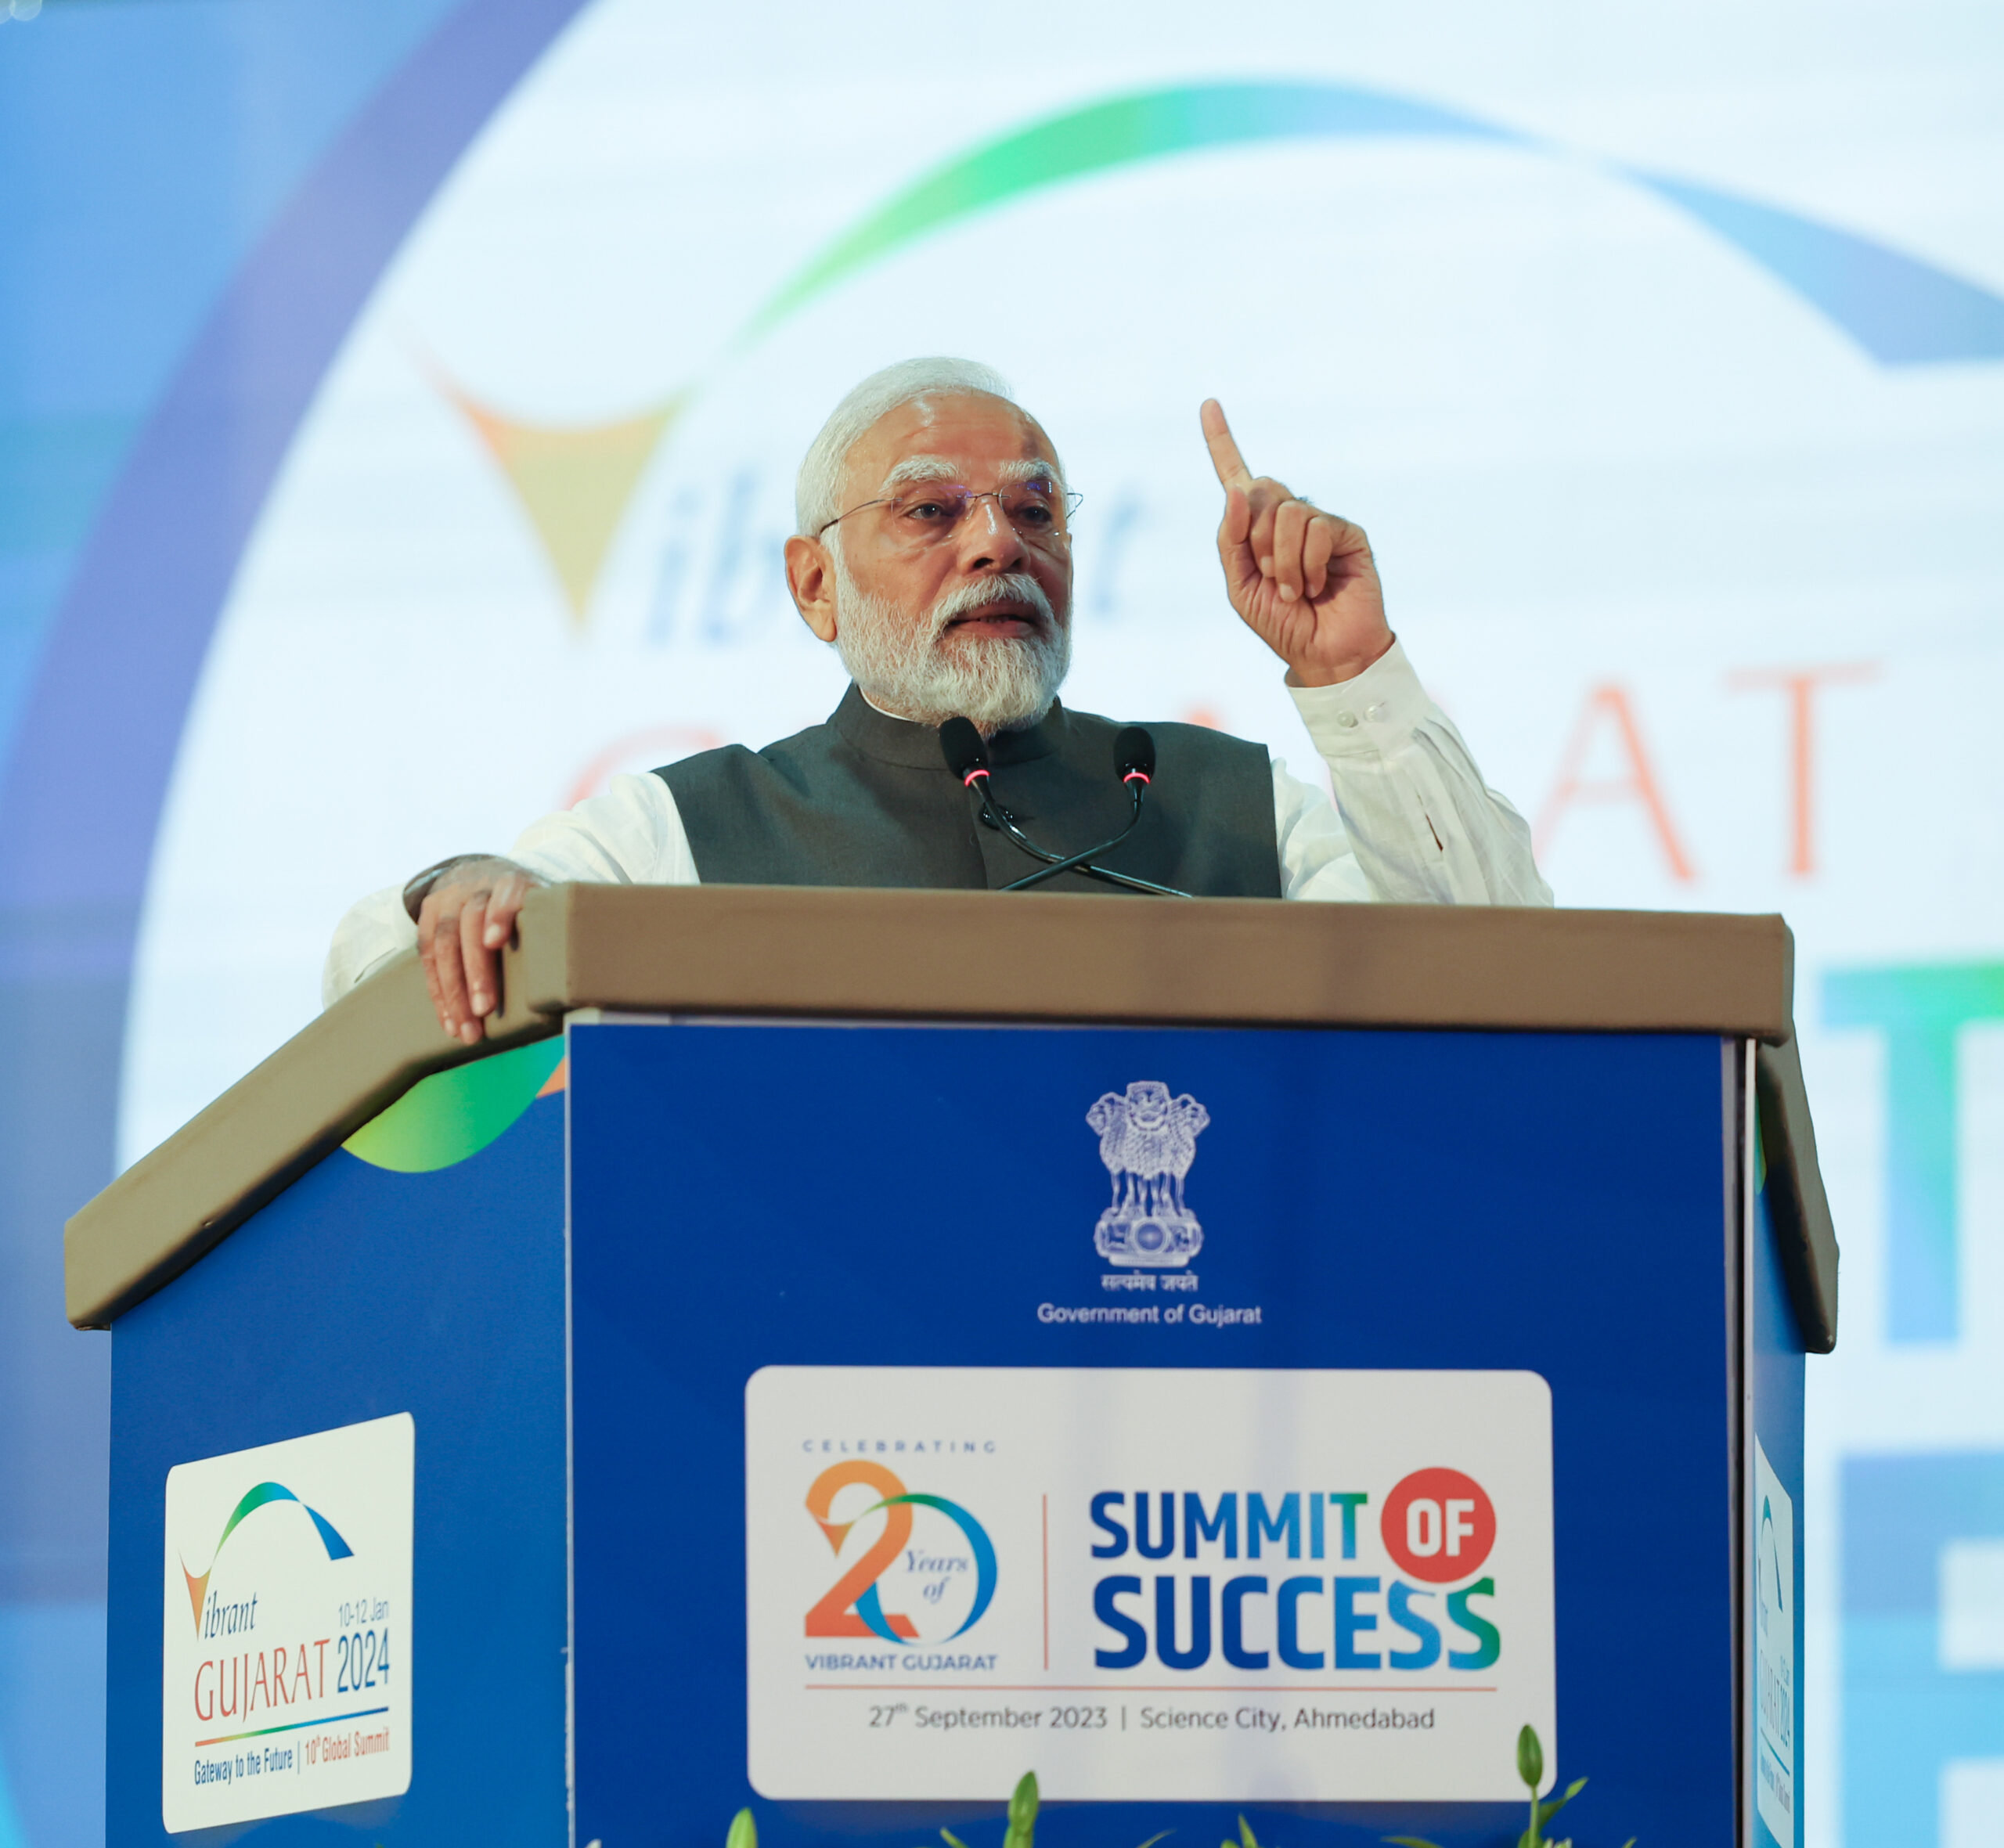 Vibrant Summit has evolved into an institution from event: PM Modi